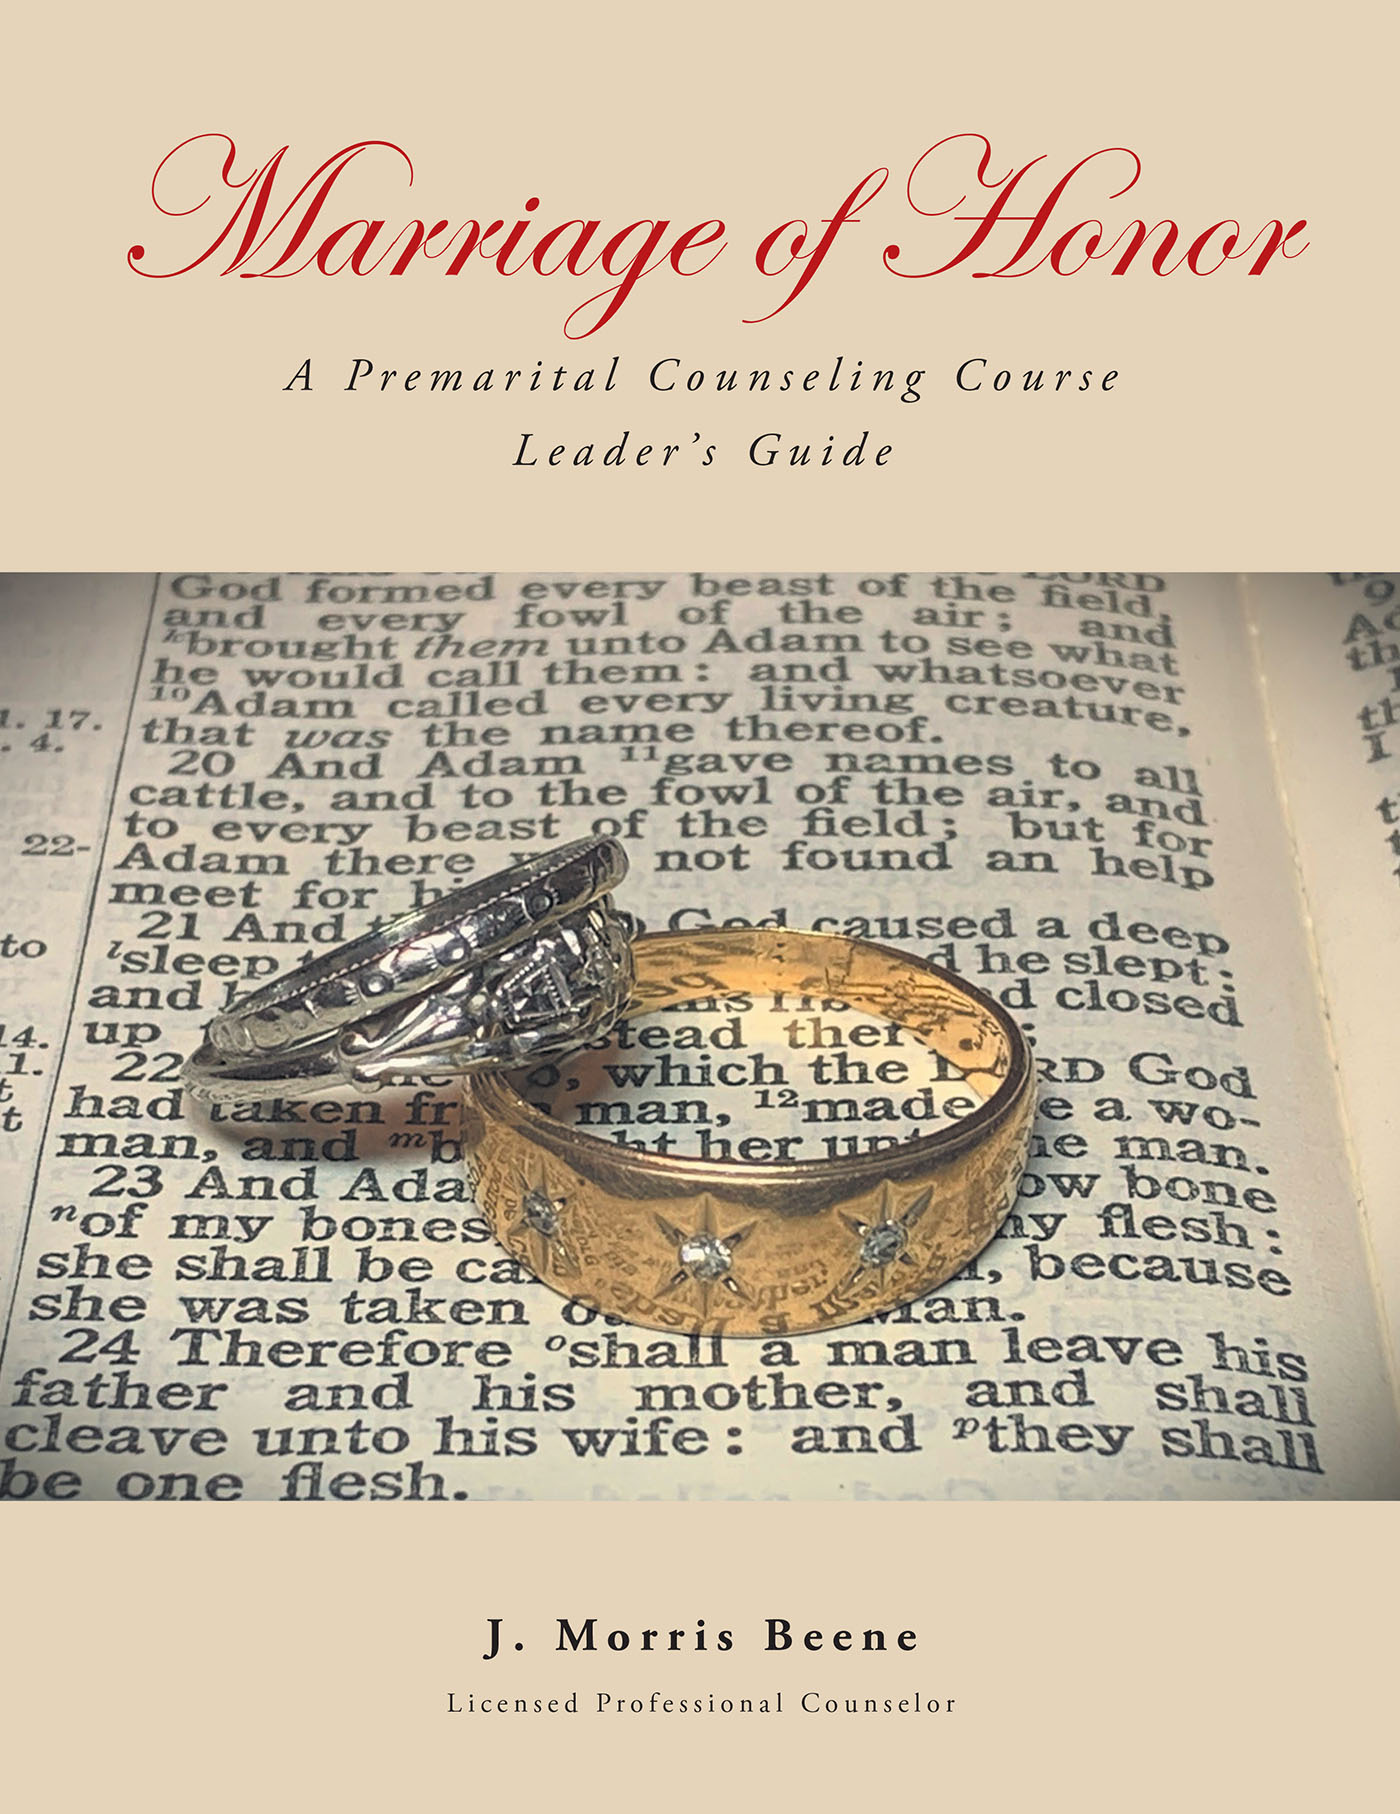 Author J. Morris Beene’s New Book, "Marriage of Honor: A Premarital Counseling Course Leader's Guide," is Designed for Couples to Form a Marriage Reflective of God's Will